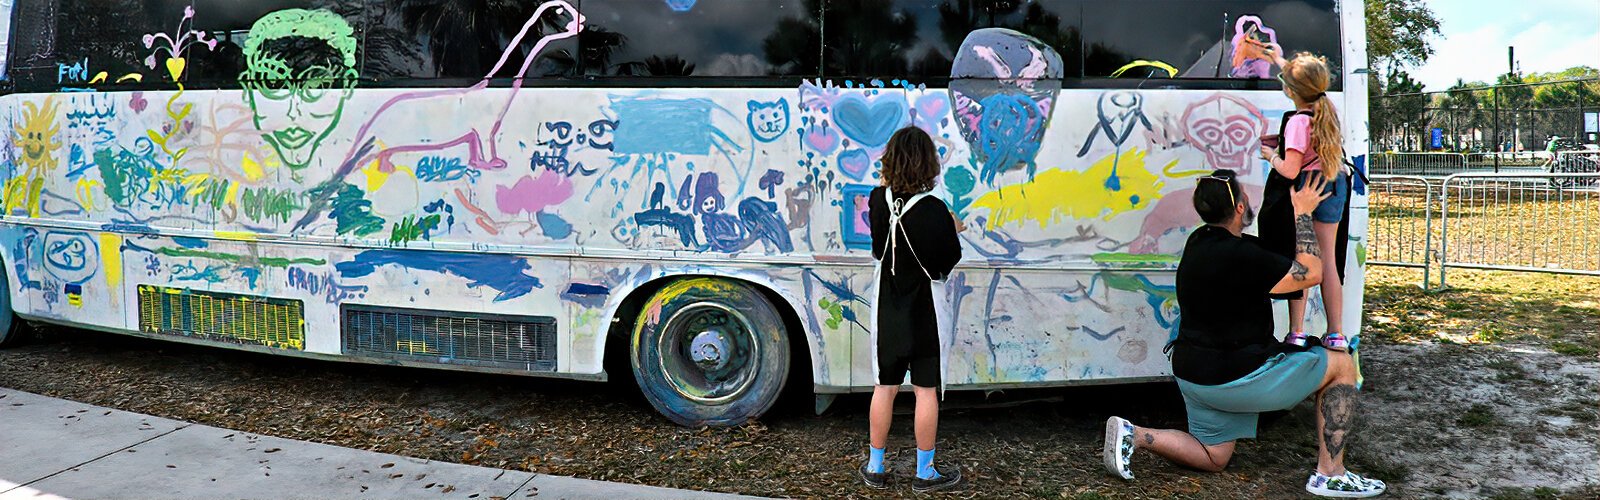 Will Shields provides his 7-year-old daughter Rylie with a higher vantage point so that she can add her touch to the NOMAD Art Bus. The interactive experience is made possible by NOMADstudio, whose mission is “art for ALL."